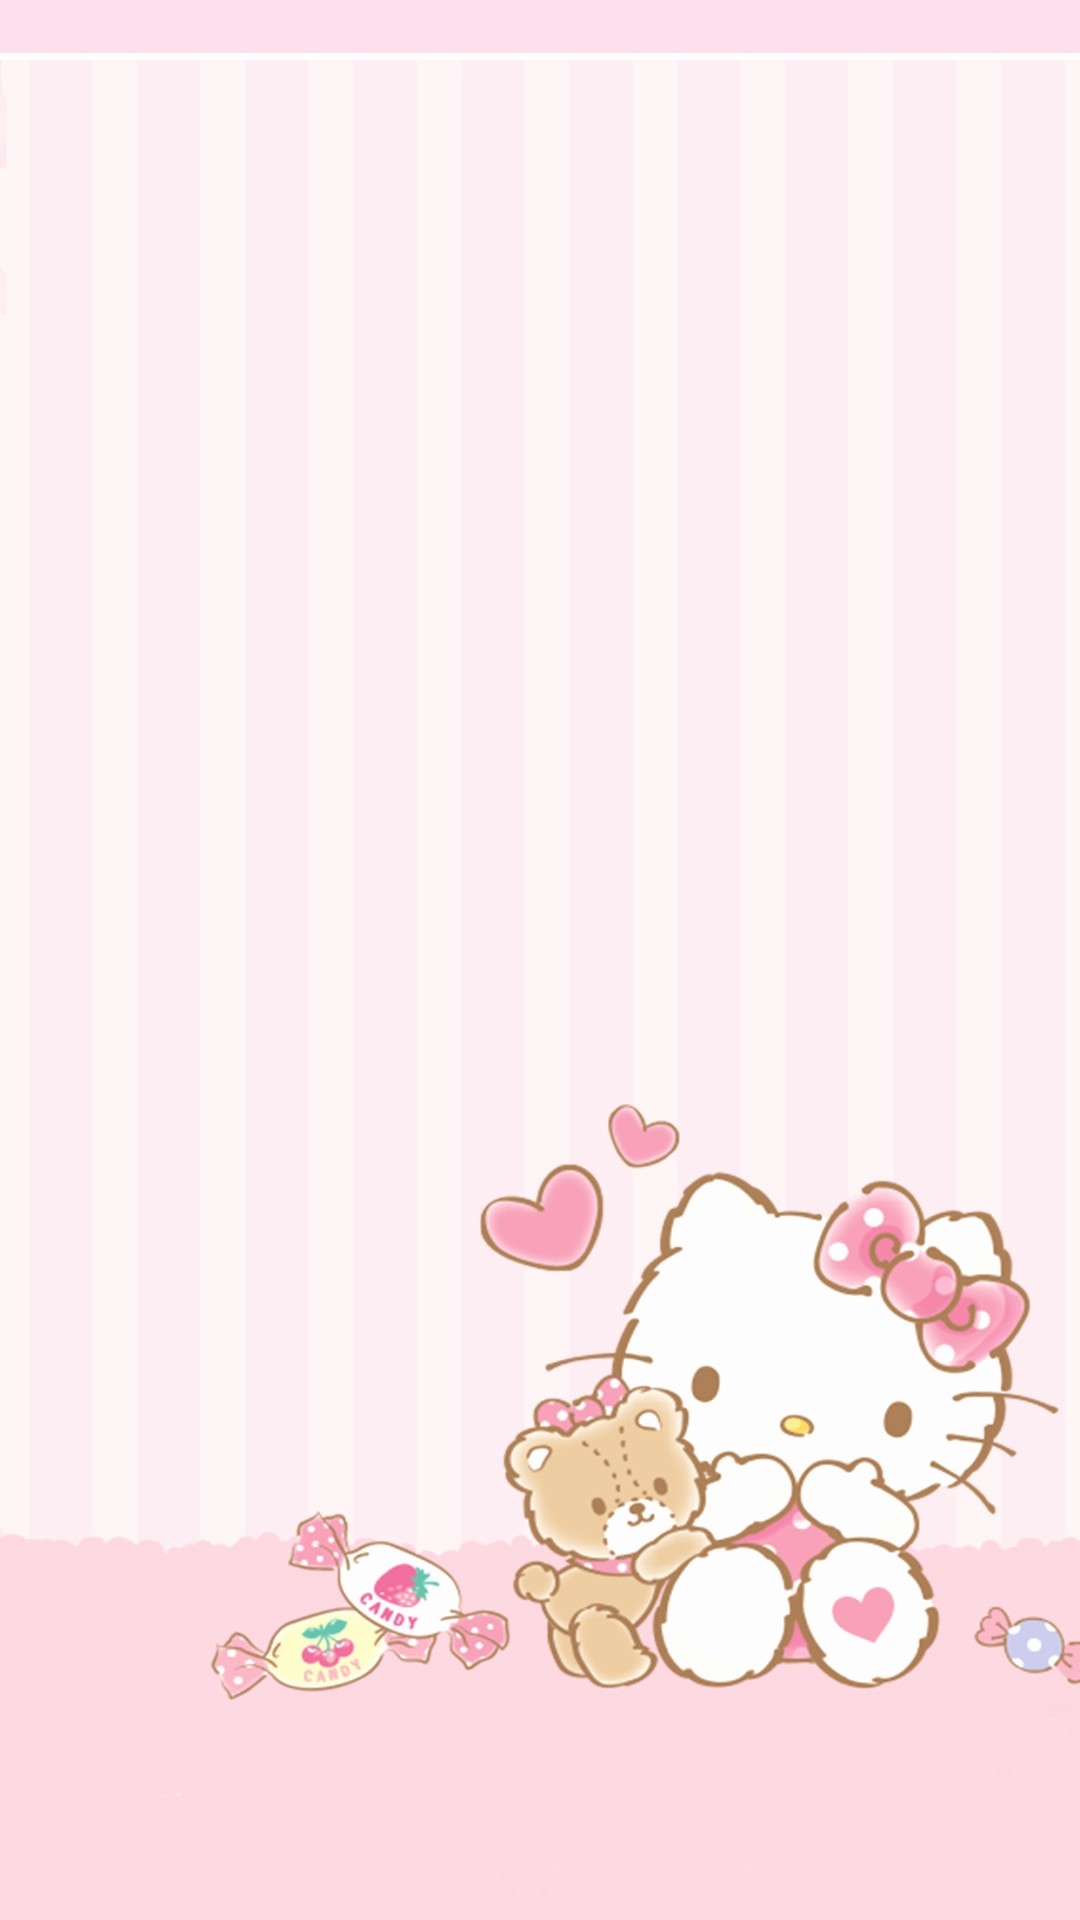 1080x1920 ... Hello Kitty iPhone Background Awesome Baby Hello Kitty Wallpaper 40  Images ...